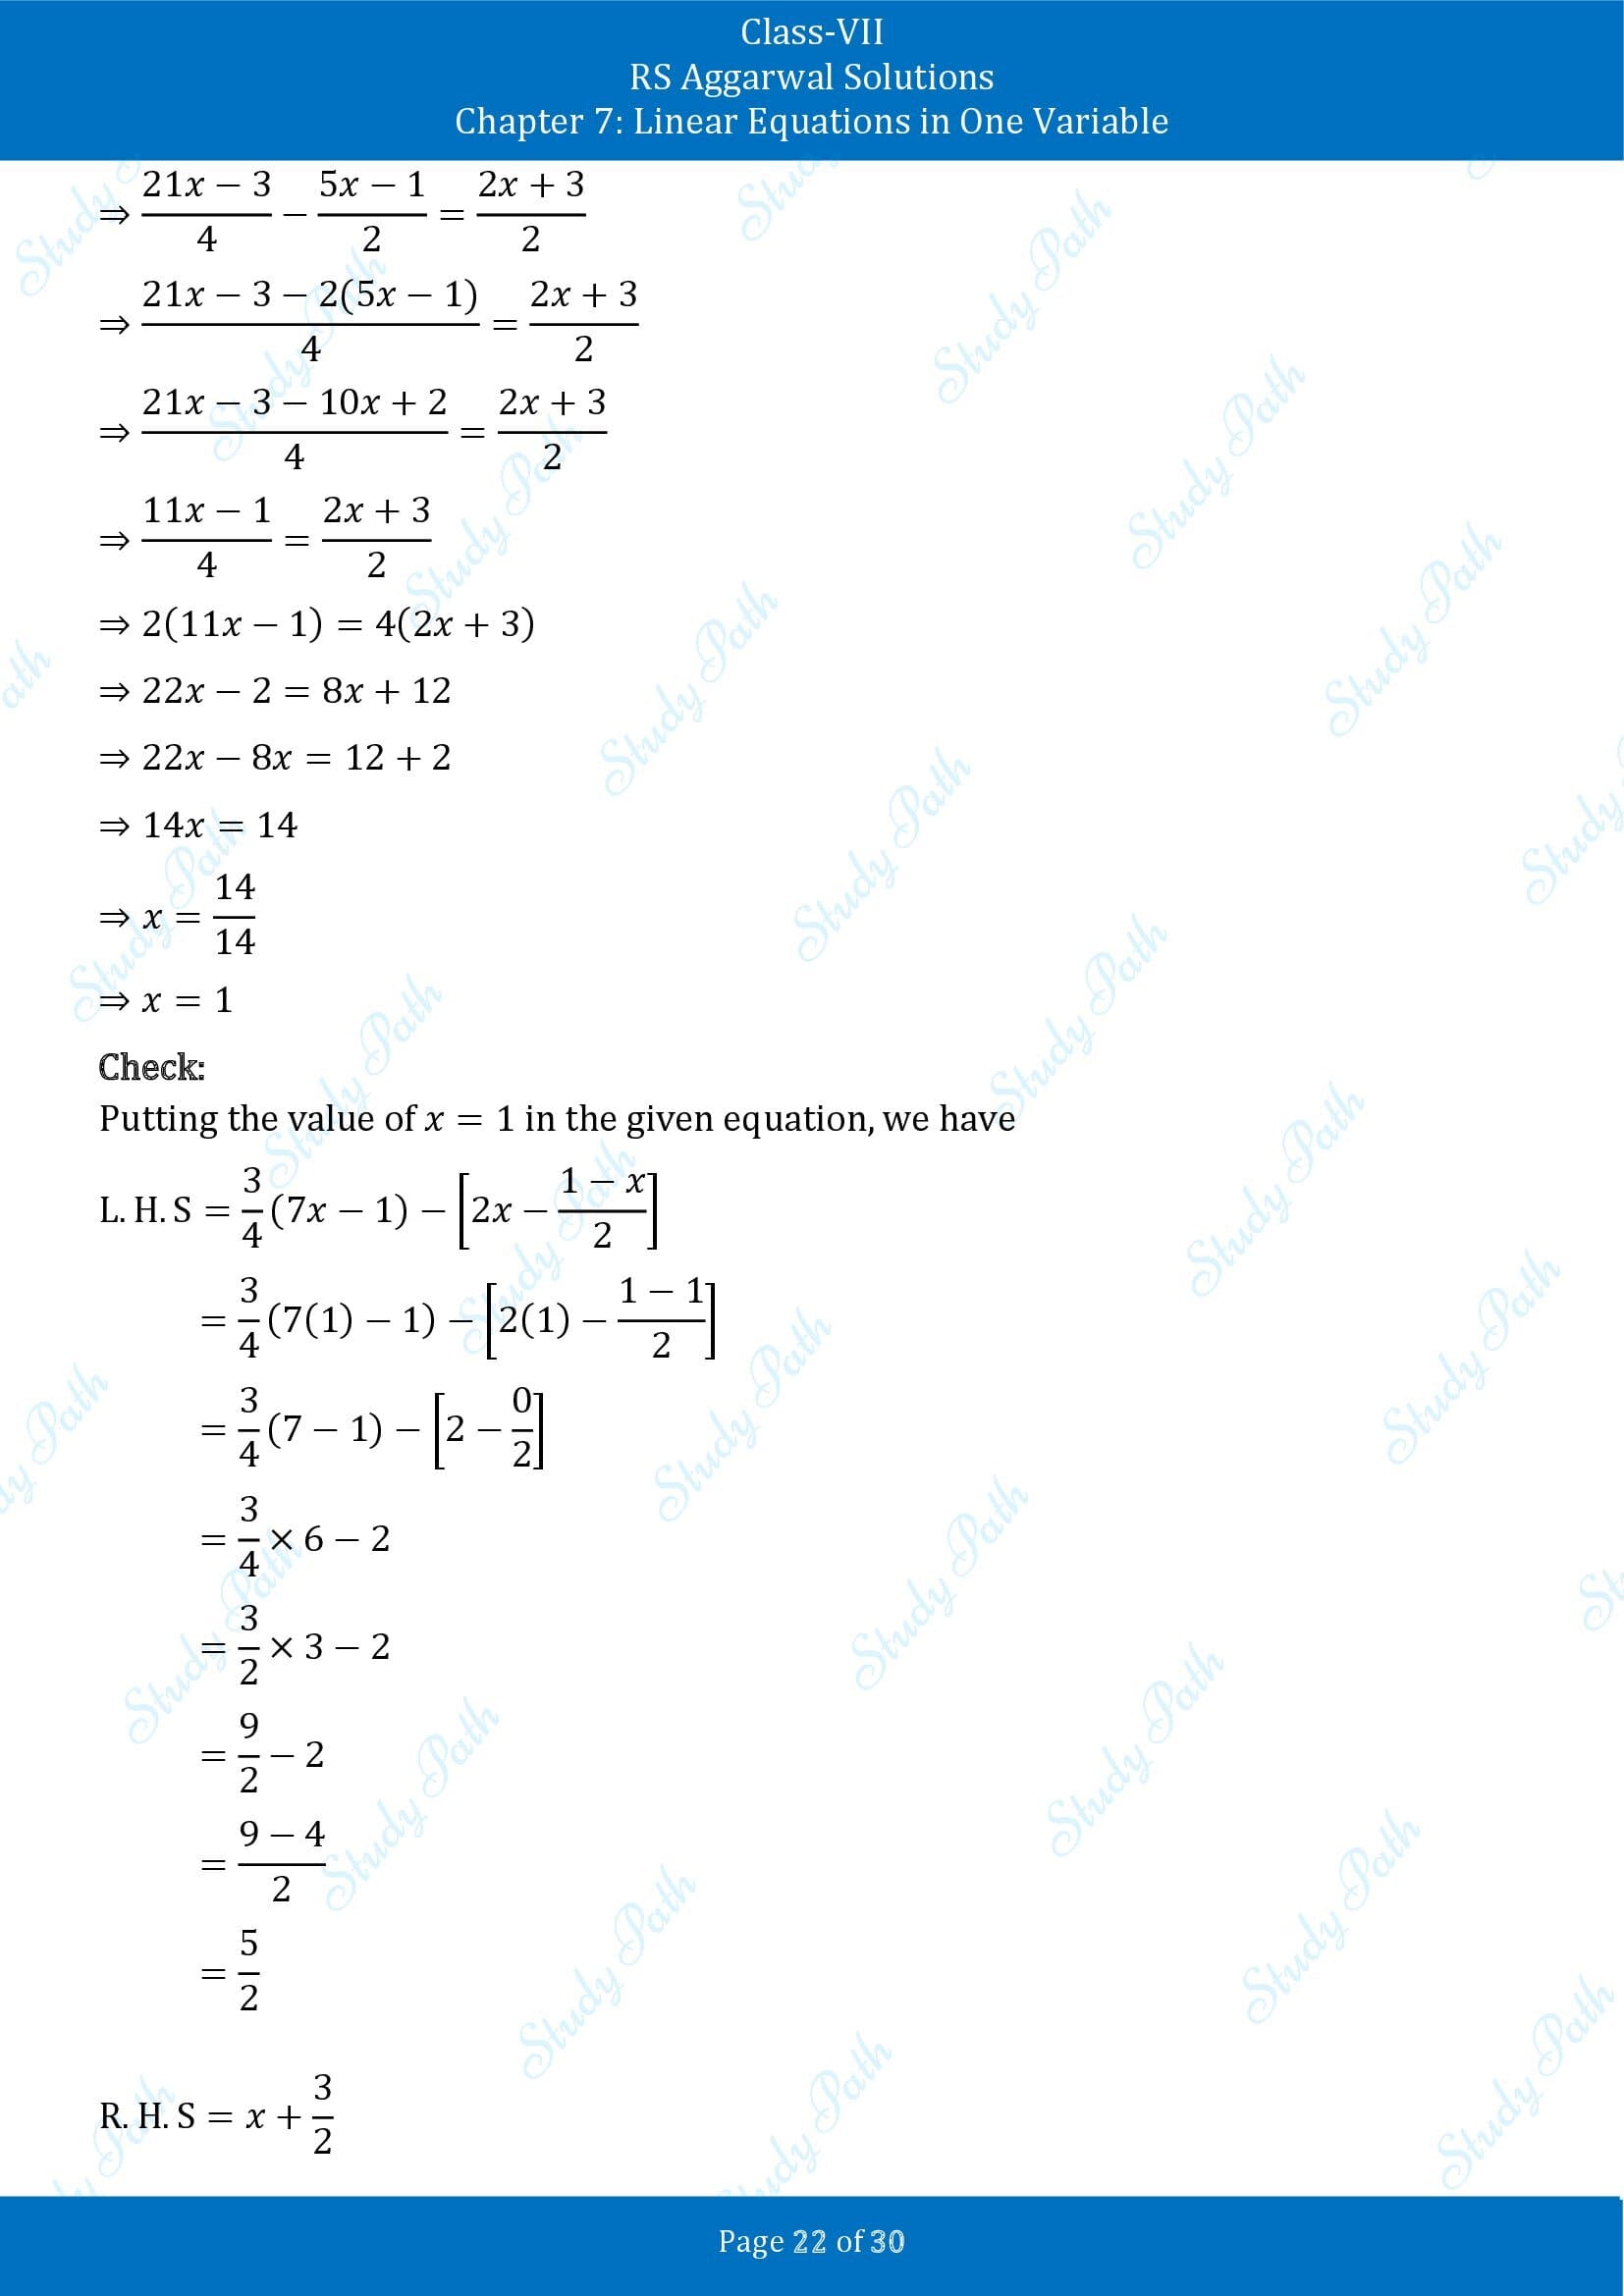 RS Aggarwal Solutions Class 7 Chapter 7 Linear Equations in One Variable Exercise 7A 00022